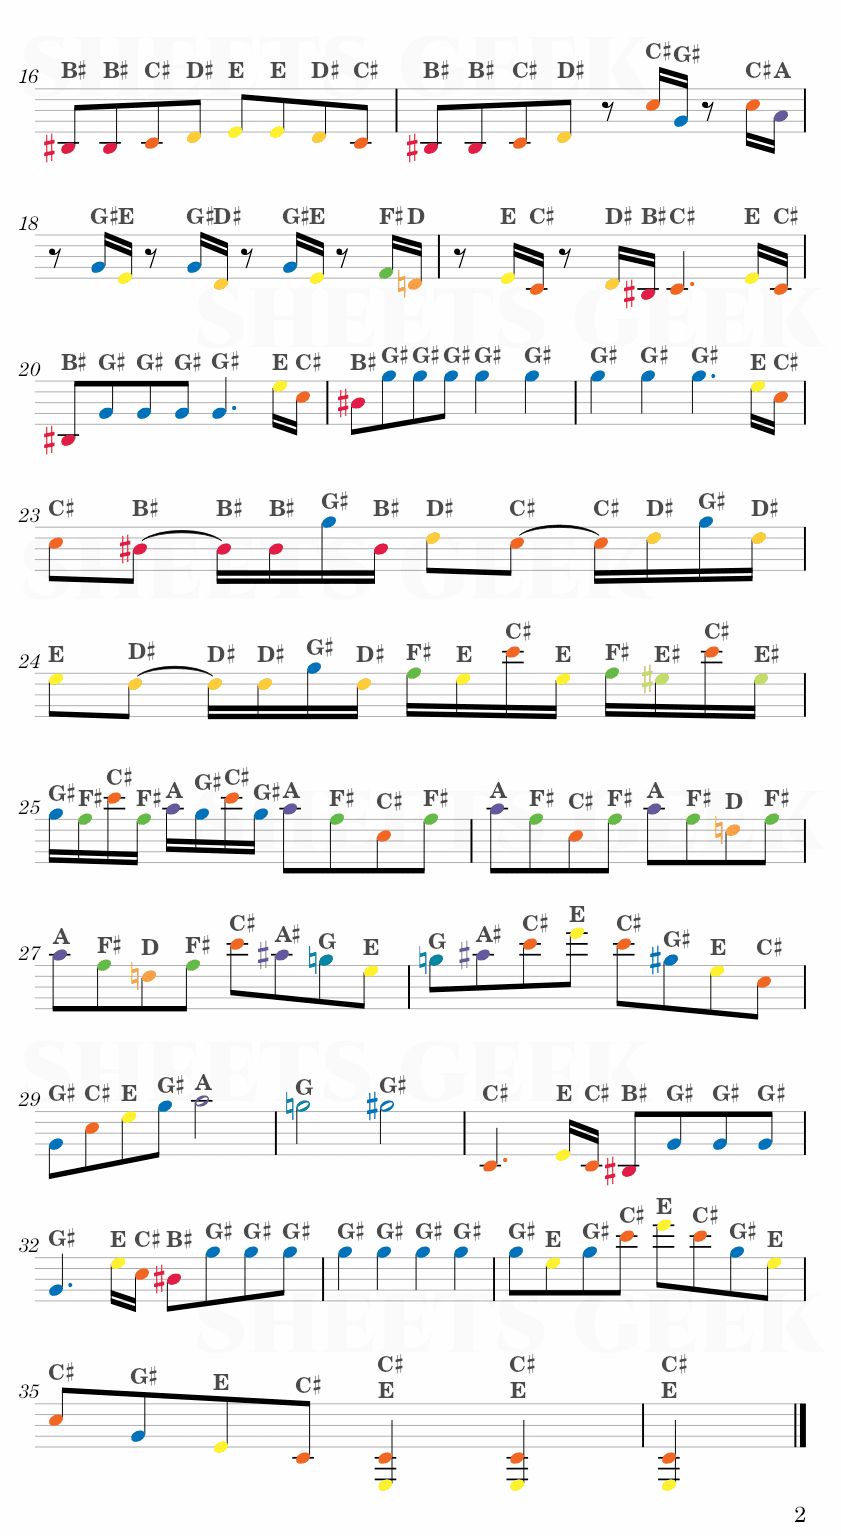 Moonlight Sonata, 3rd Movement - Ludwig Van Beethoven Easy Sheet Music Free for piano, keyboard, flute, violin, sax, cello page 2